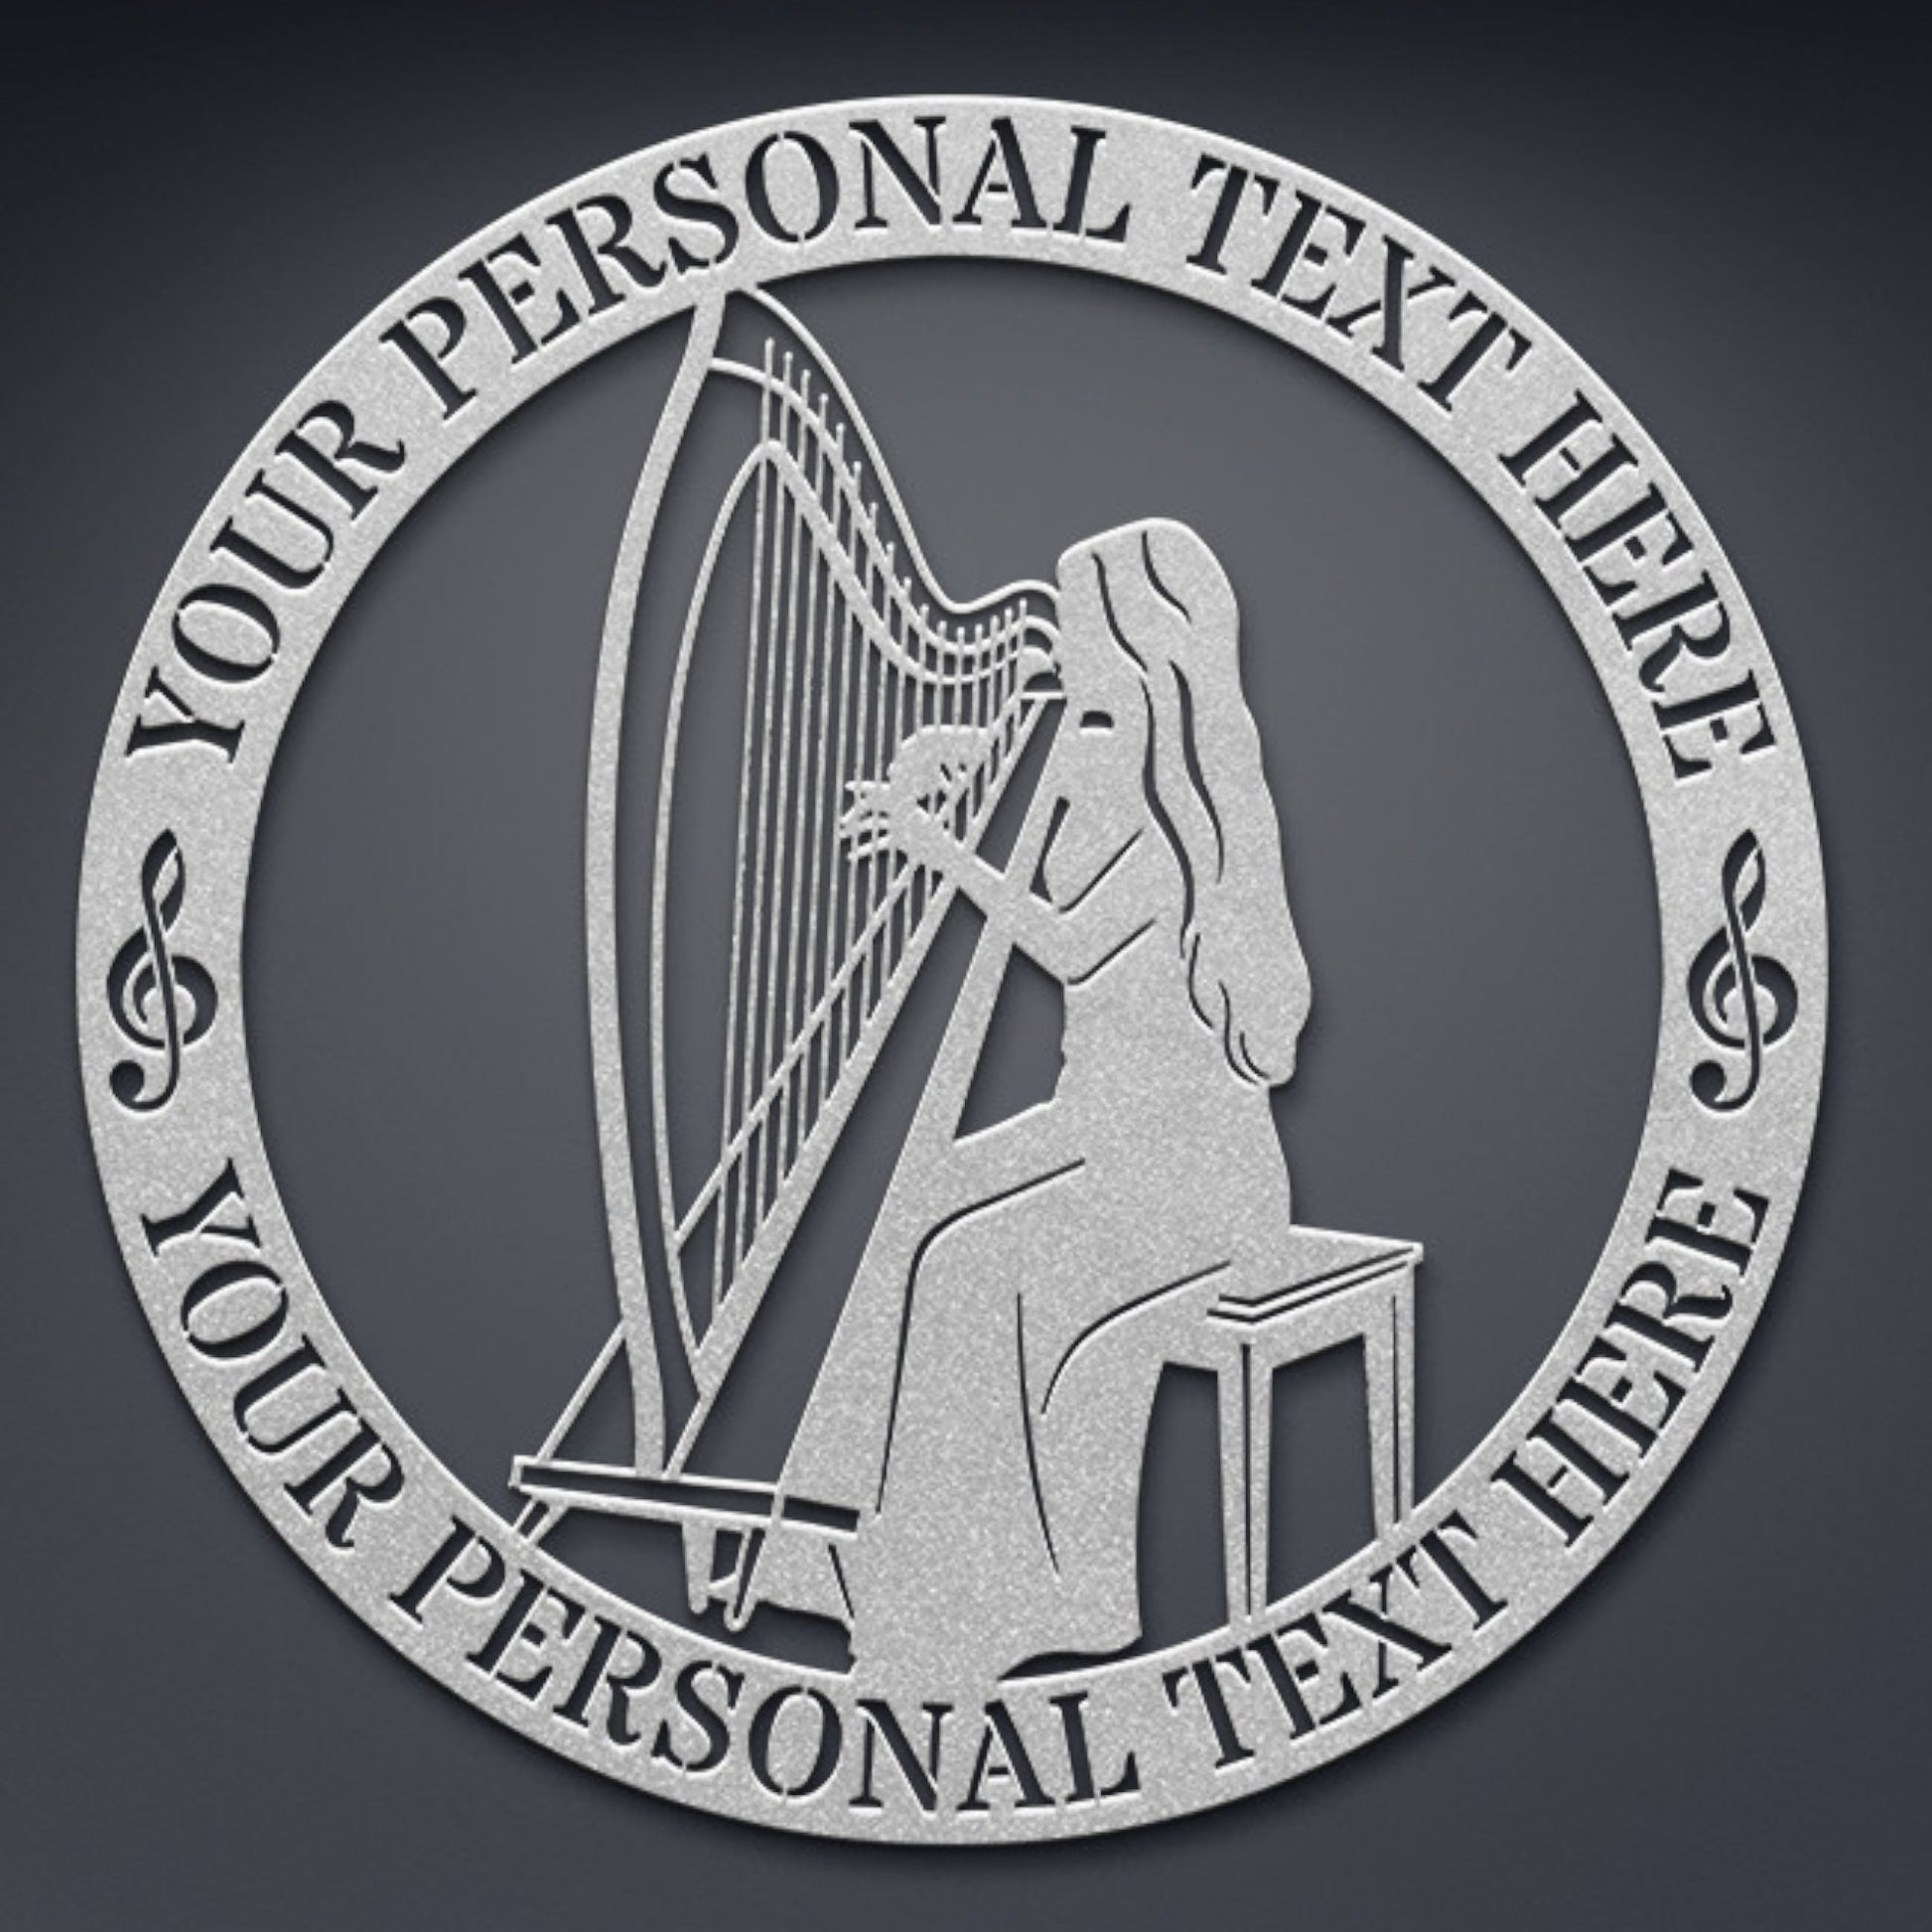 Personalized Harp Player Metal Sign Gift. Custom Female Harpist Wall Decor. Music Entertainer. Personal Gift To Musician. Musical instrument